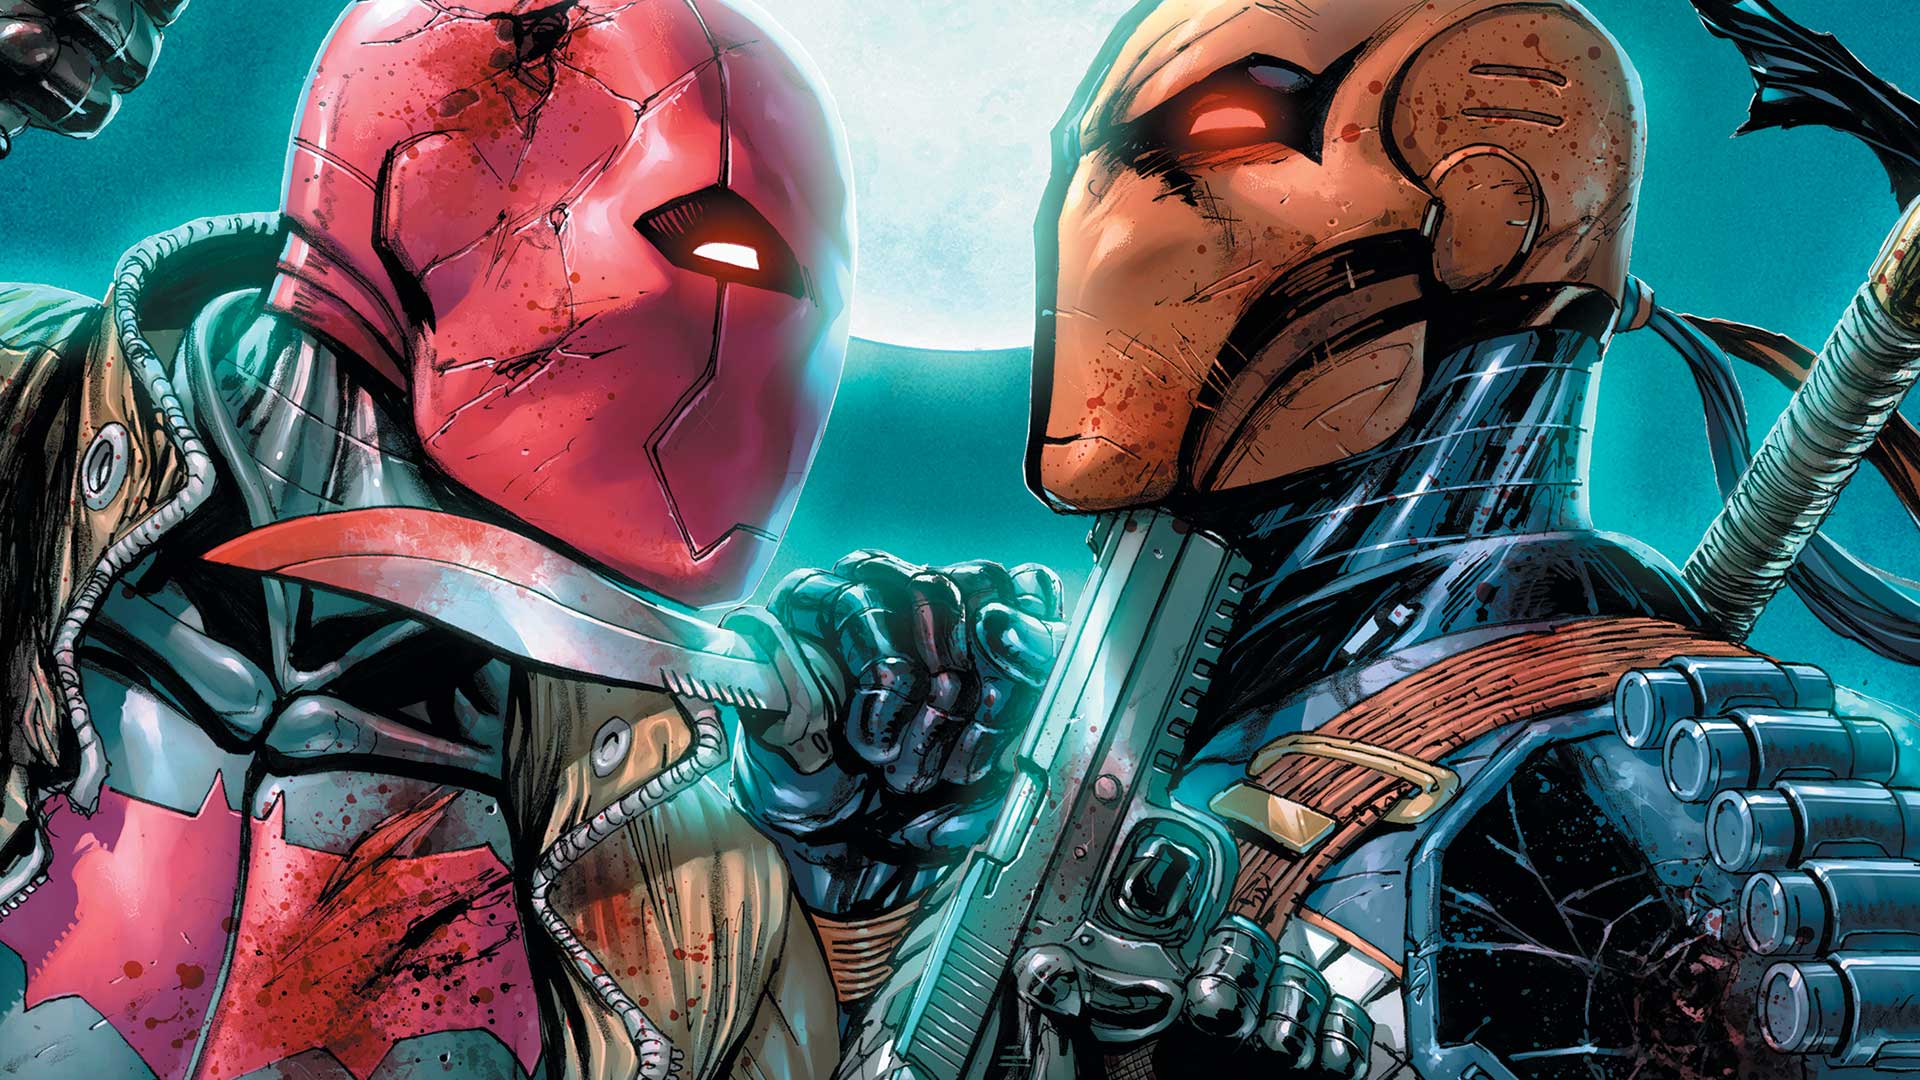 This Just Happened: It's Deathstroke vs Red Hood (and more)!